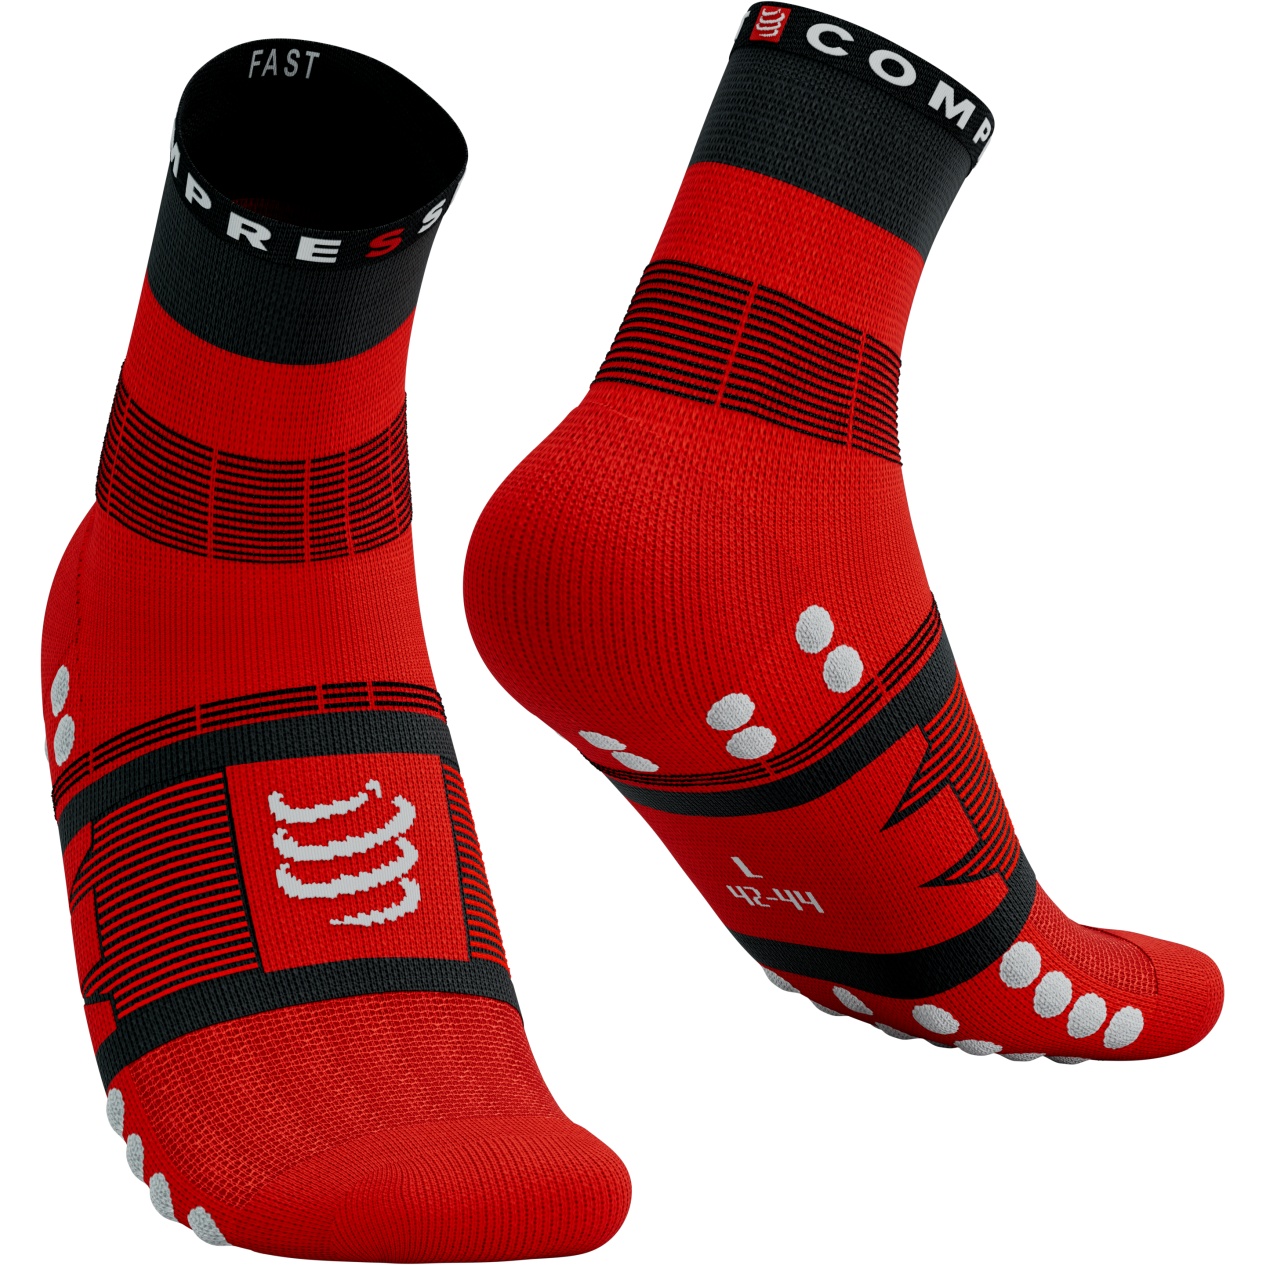 Picture of Compressport Fast Hiking Socks - black/high risk red